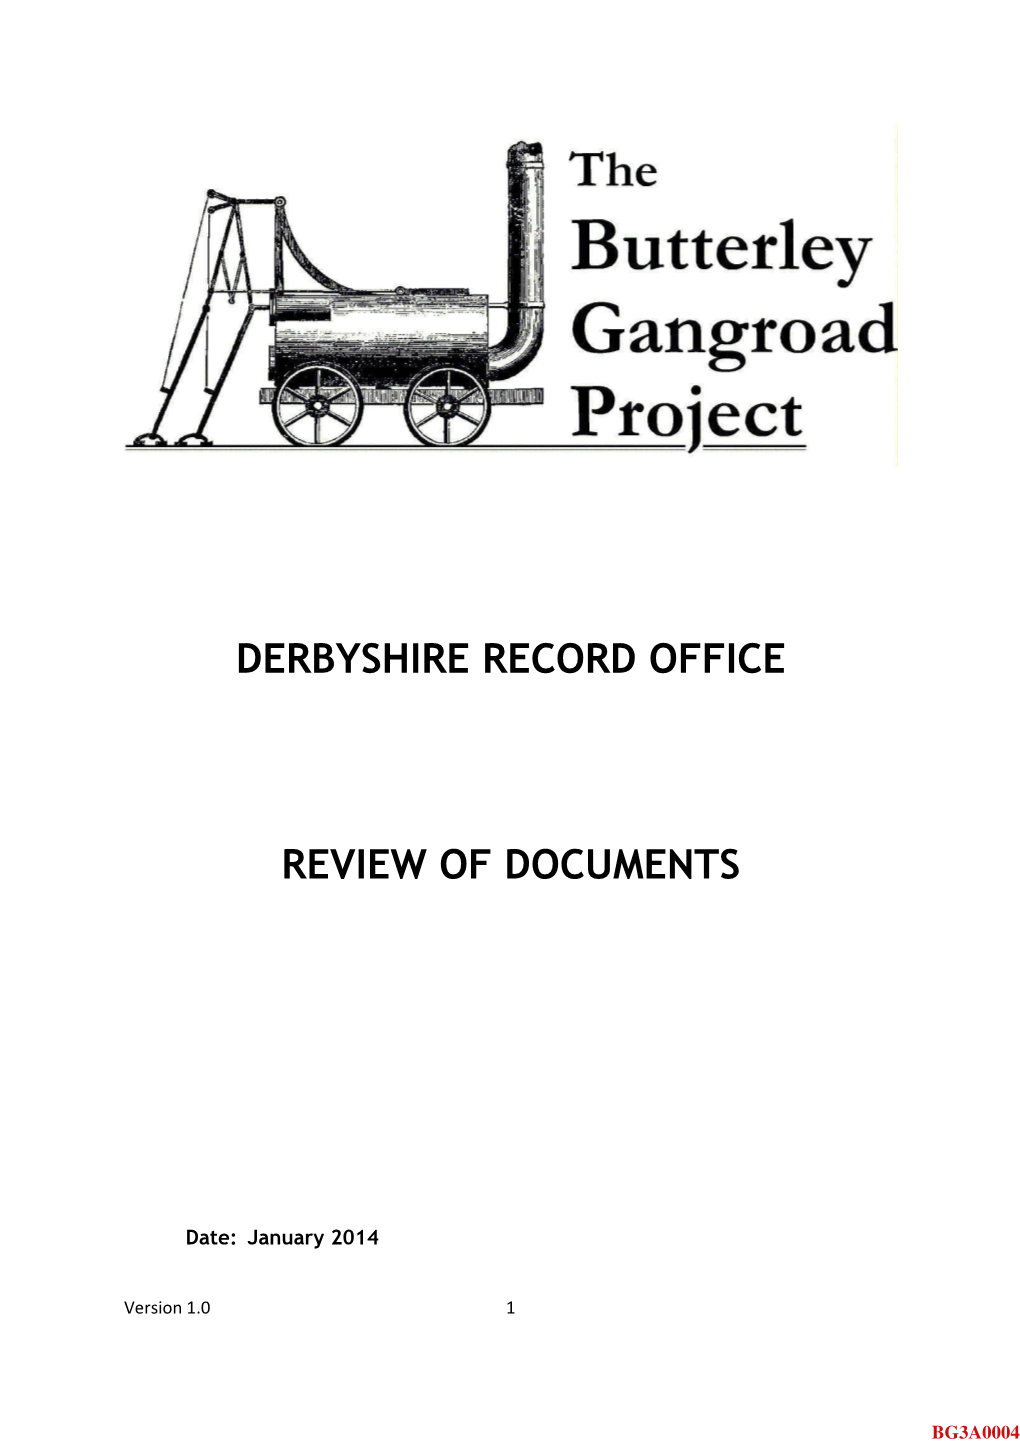 Derbyshire Record Office Review of Documents